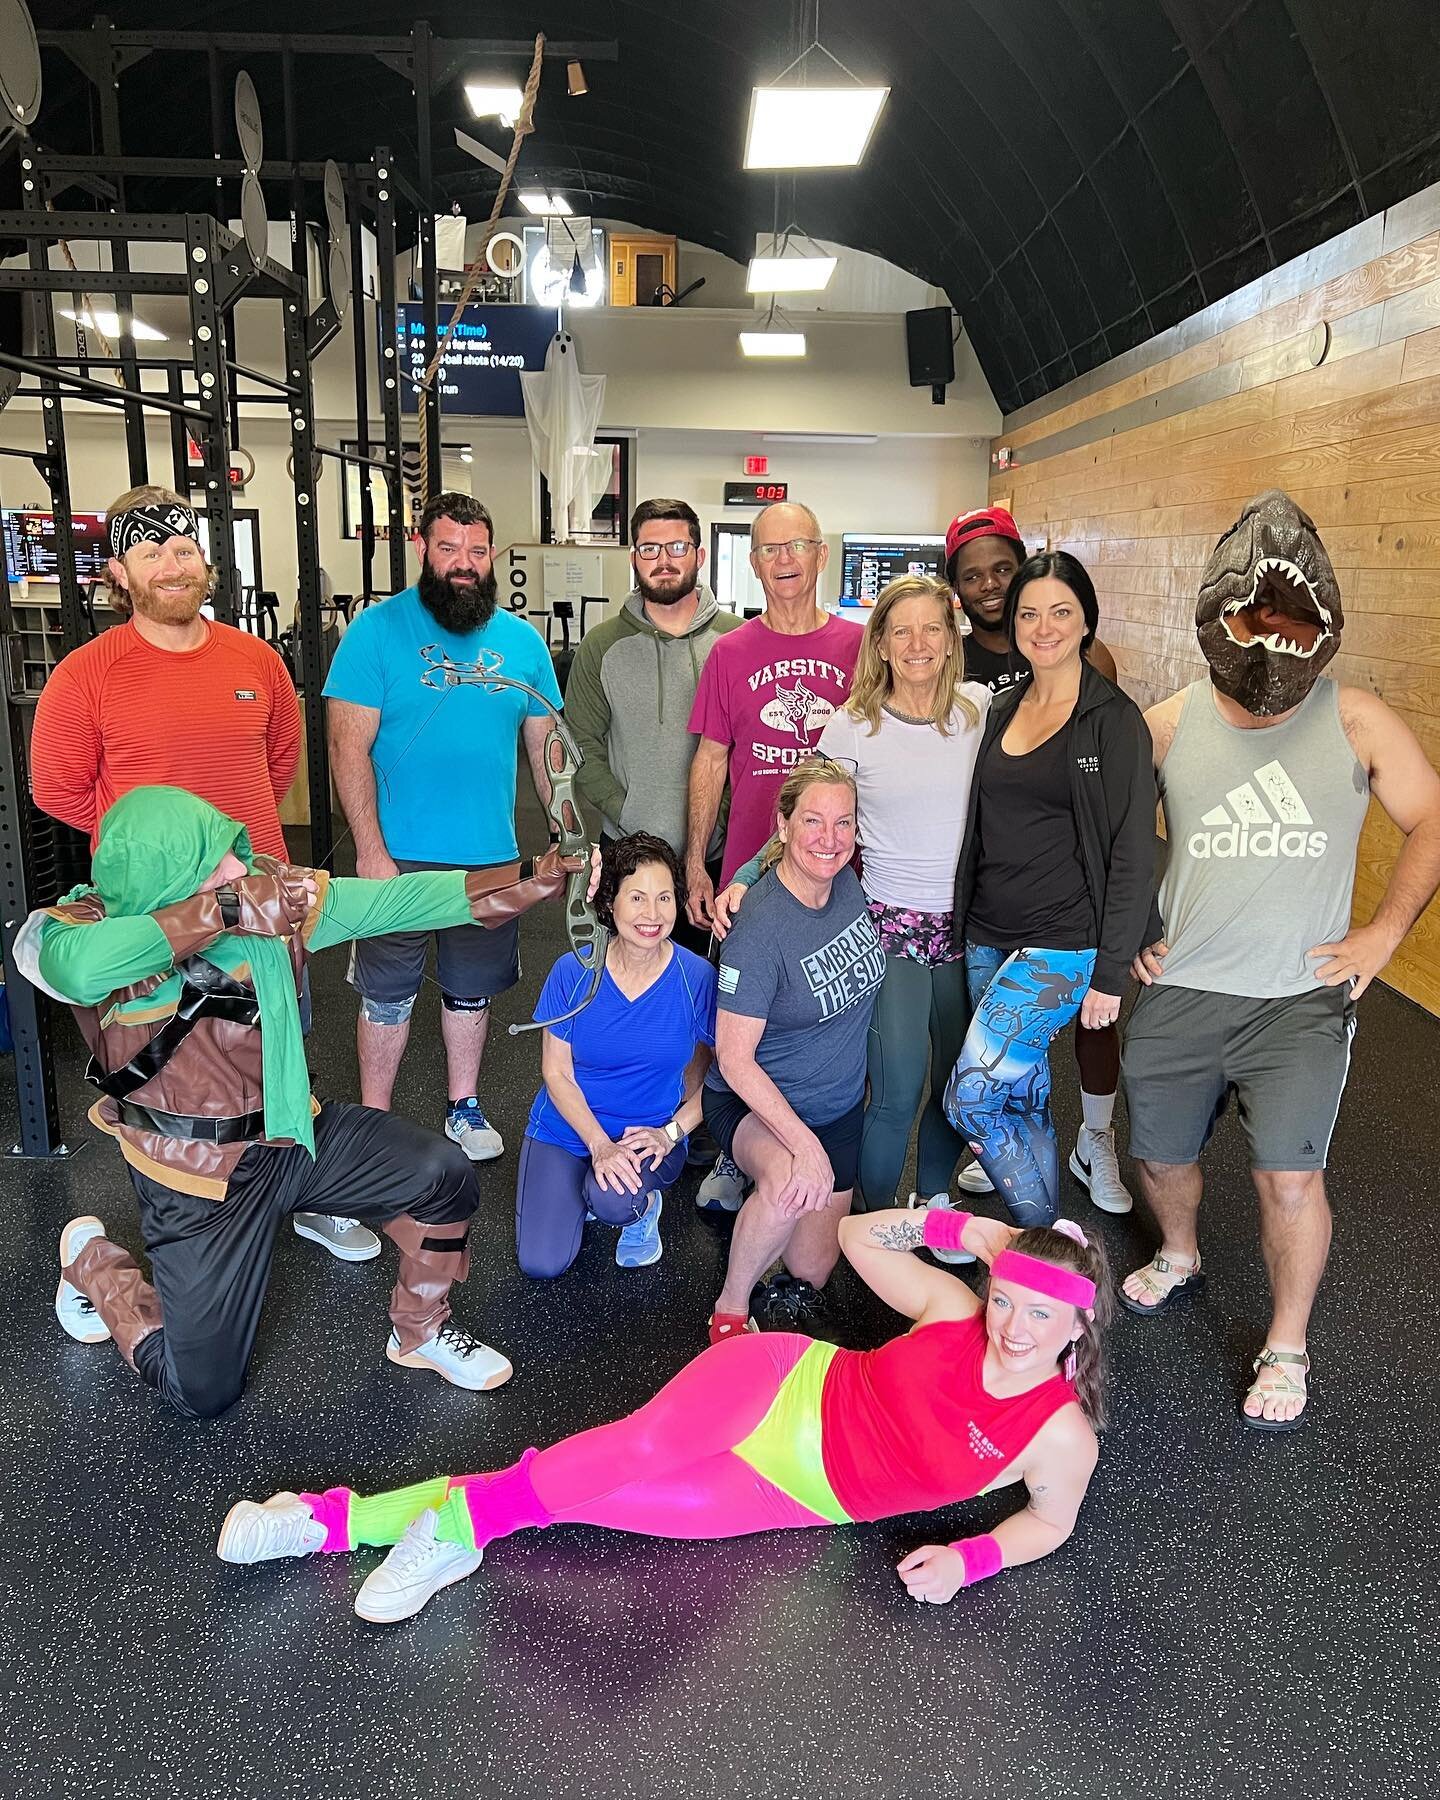 If you can&rsquo;t tell&hellip;we&rsquo;ll take any opportunity to have a little fun 🤣👻 
&bull;
Thanks to all the athletes who came and made our costume WOD fun (and even hit PRs along the way 😮&zwj;💨)! 
&bull;
See you in 2 weeks for Friendsgivin